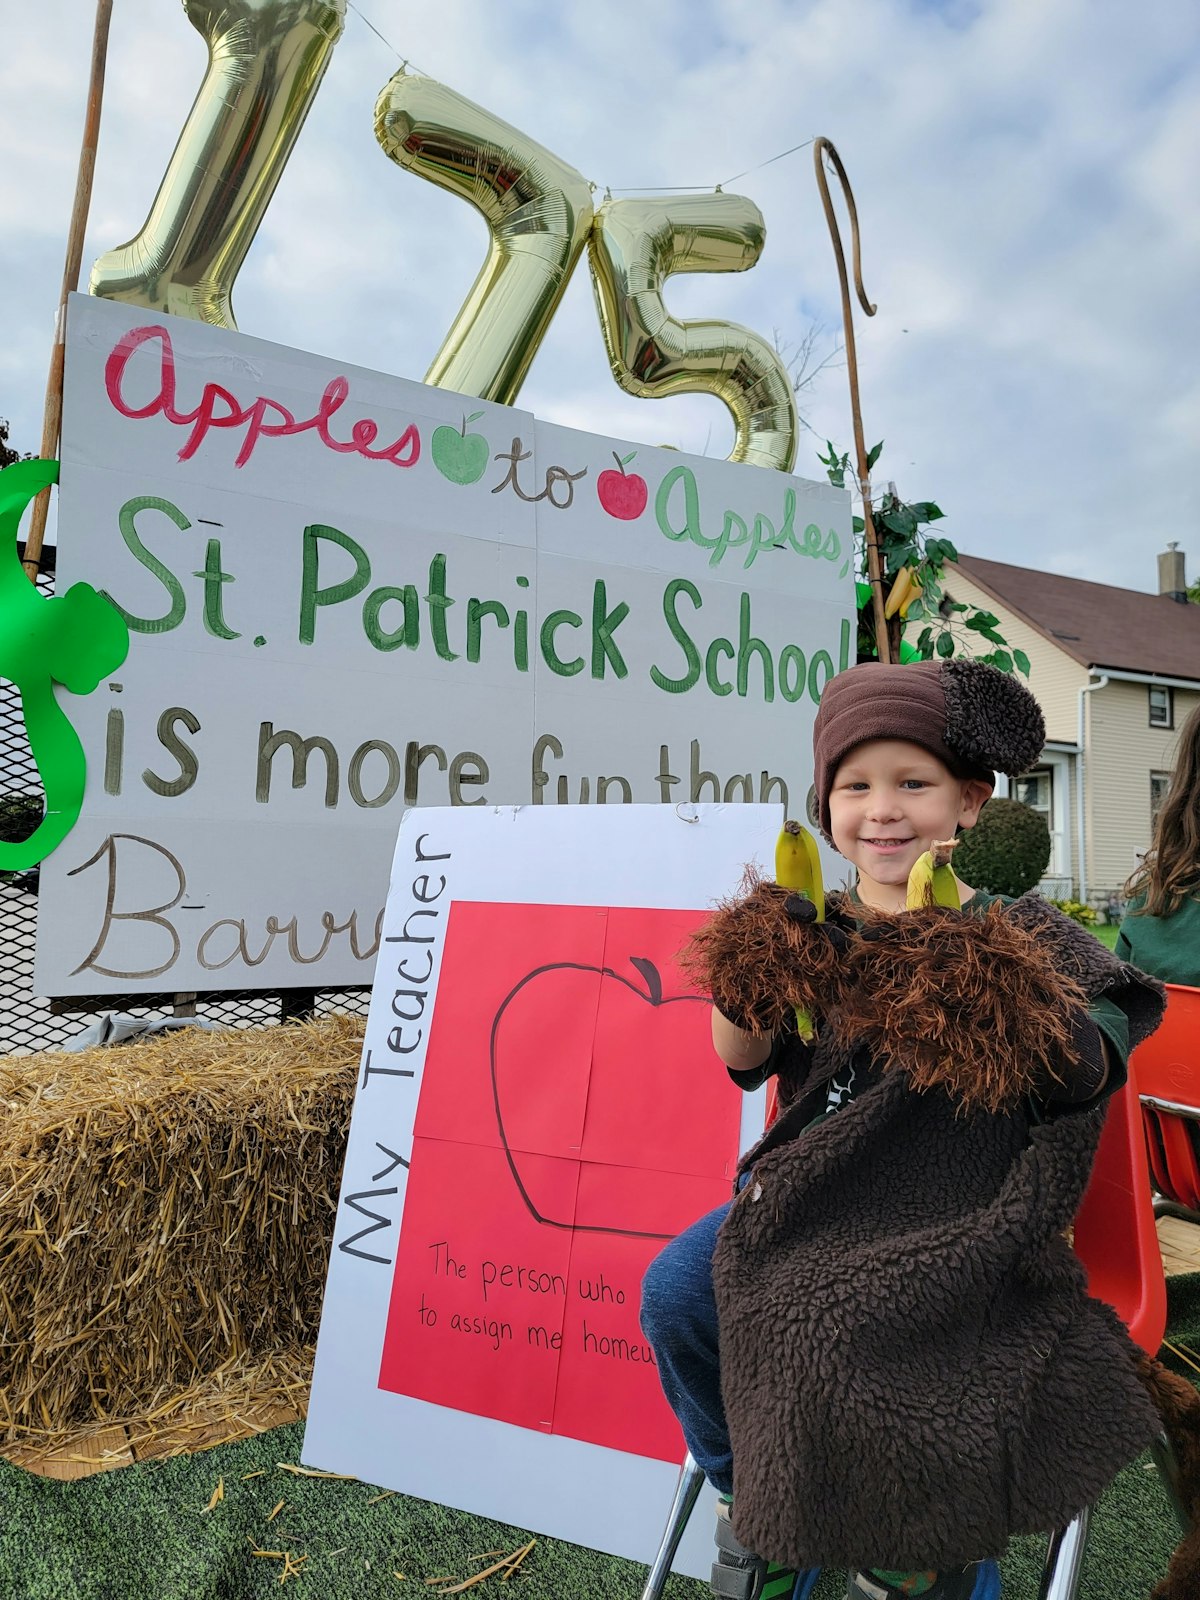 The entire community will celebrate the 175th anniversary during St. Patrick's Spring Festival, May 17-19. (Courtesy of St. Patrick School)